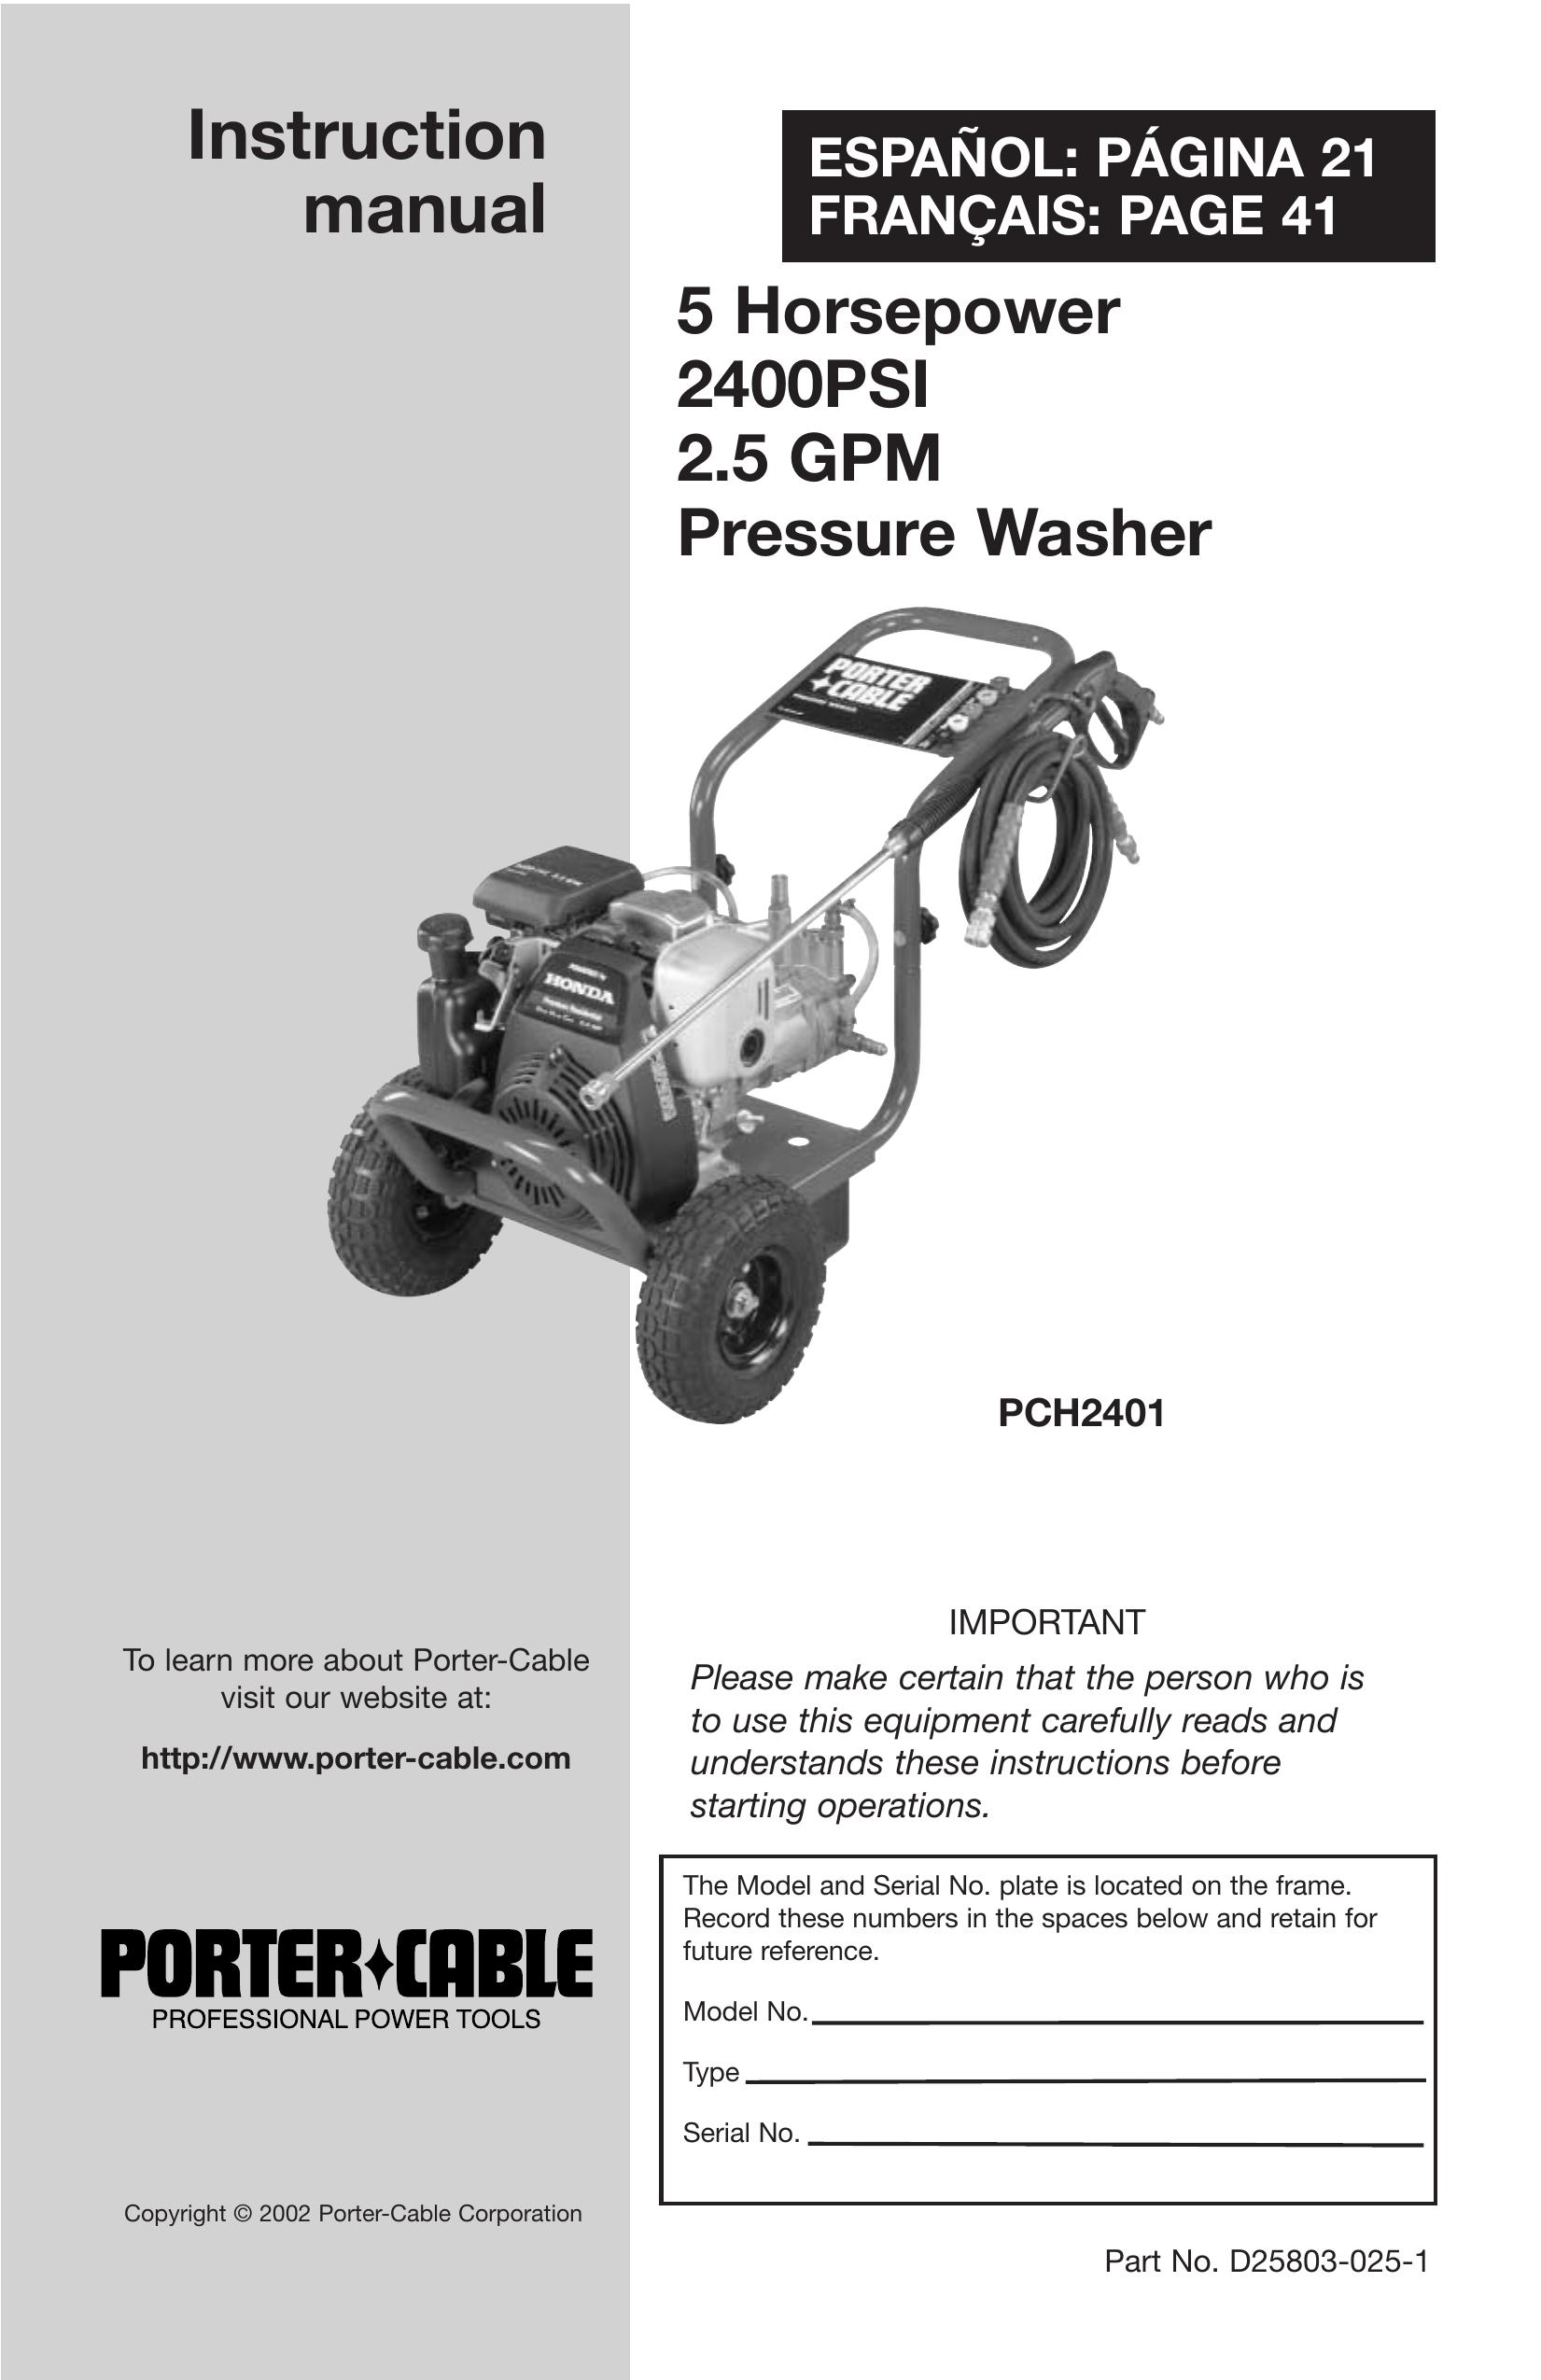 Porter-Cable D25803-025-1 Pressure Washer User Manual